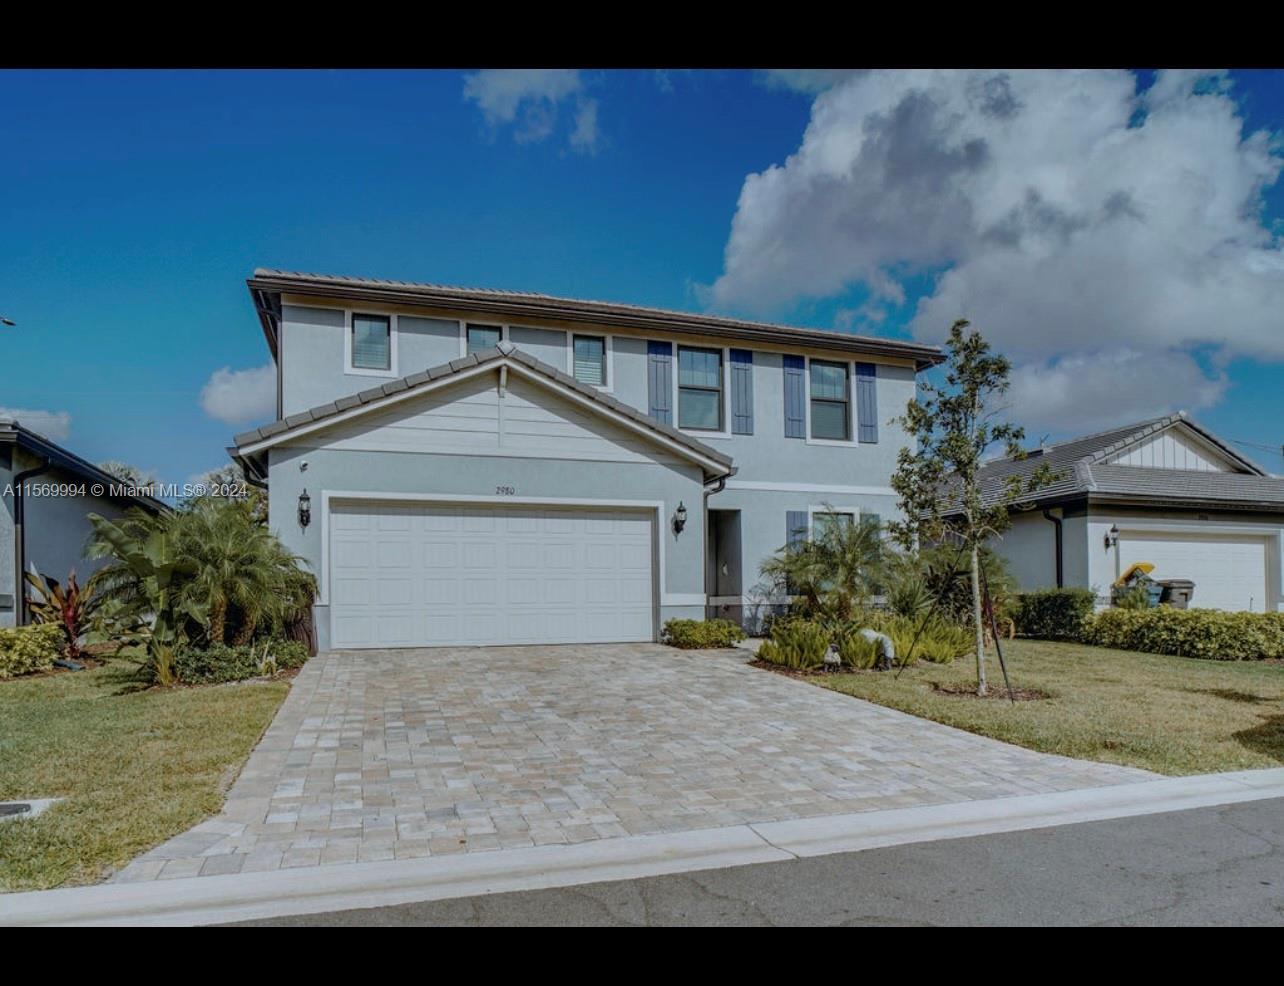 Photo of 2980 Shortleaf Ave in Lauderdale Lakes, FL